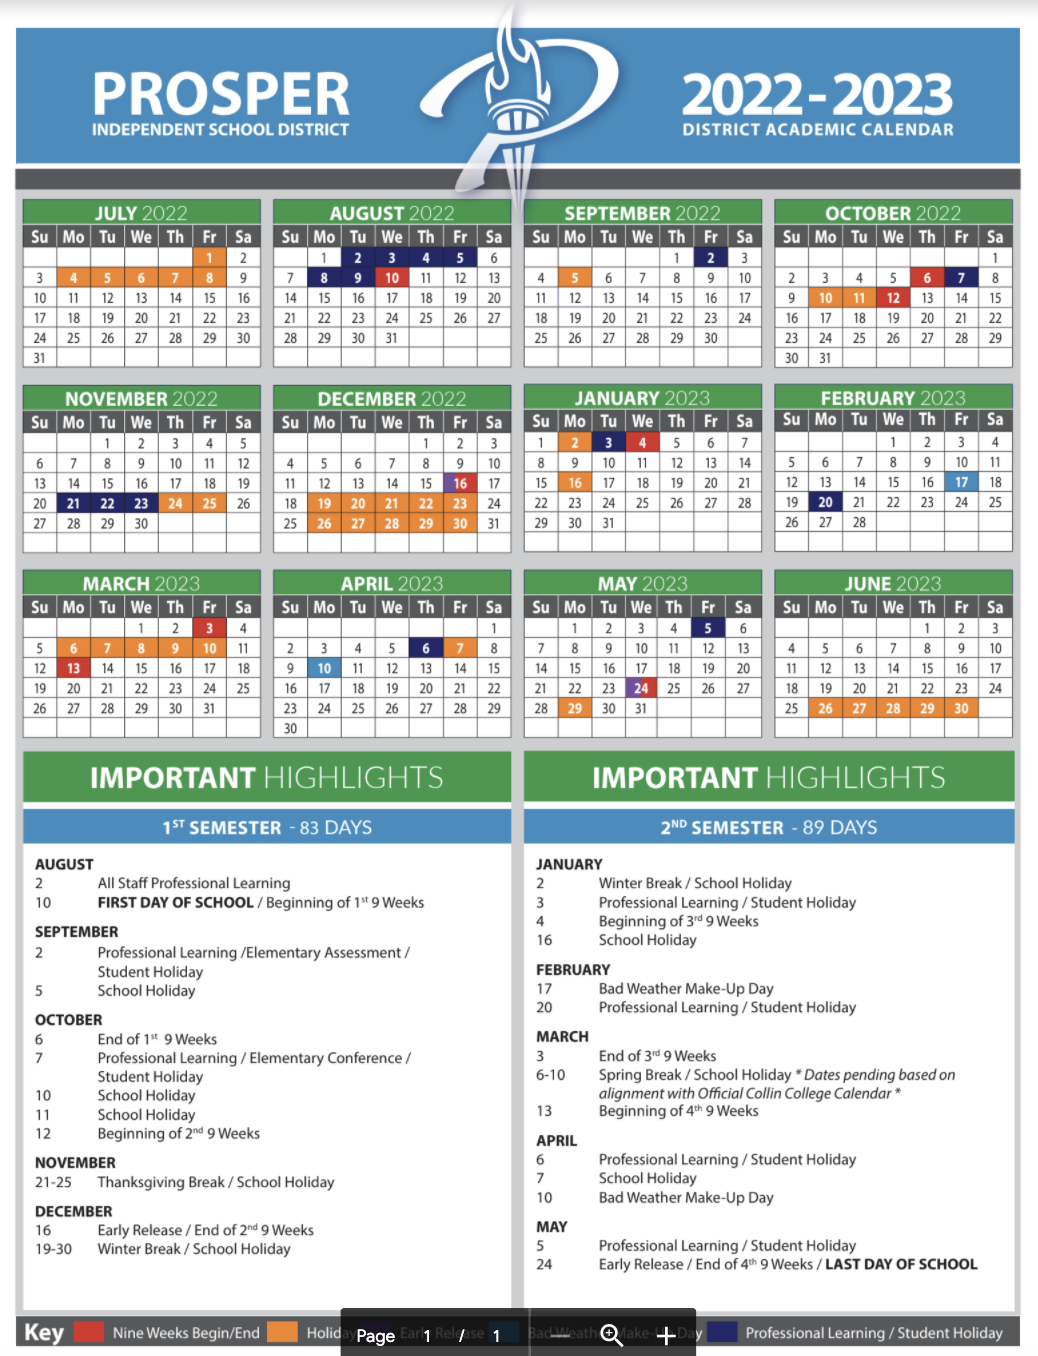 Collin College Calendar 2022 2023 Here Are Prosper Isd's School Calendars For The 2022-2023 And The 2023-2024  School Years | Cities | Checkoutdfw.com